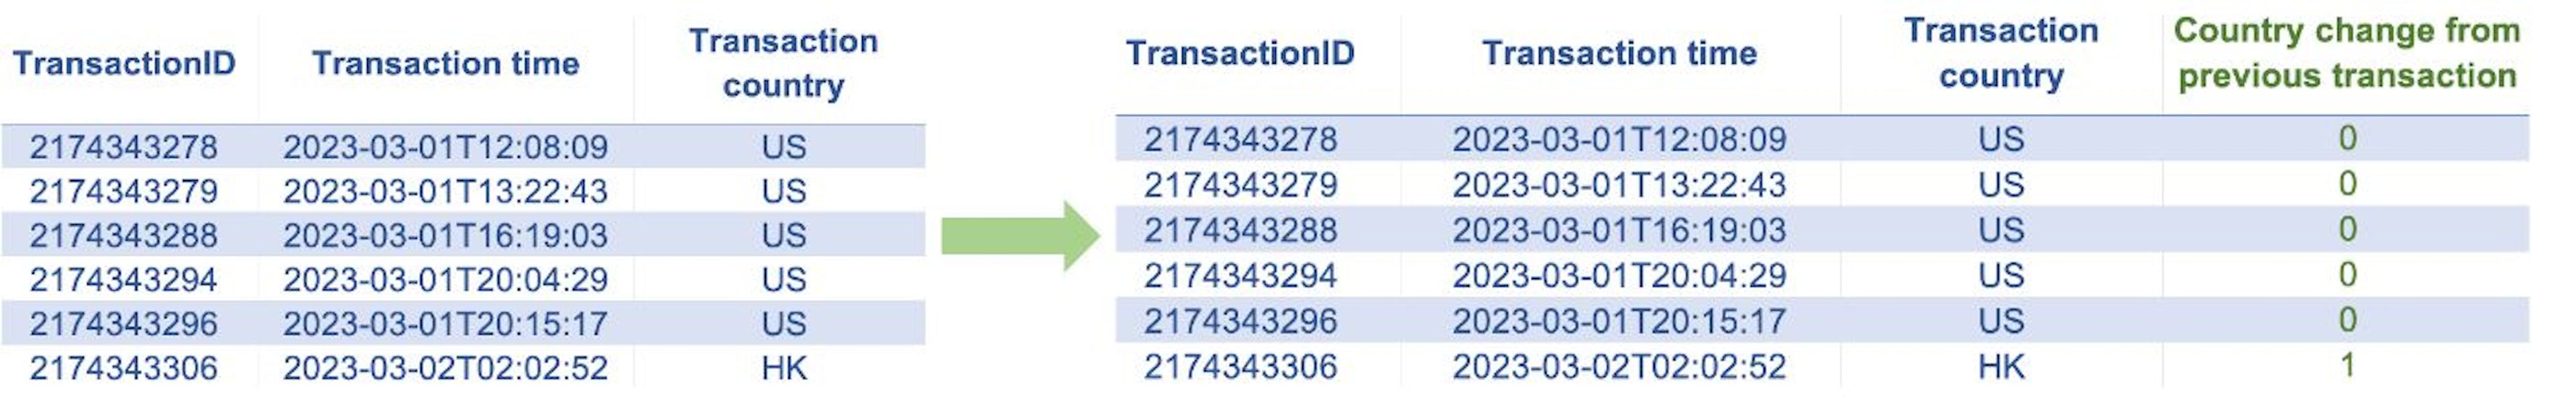 The tables above show an example of indicator encoding. Here we have created a new numeric feature "Country change from previous transaction" by comparing a customer's current transaction country location to their previous transaction country location.